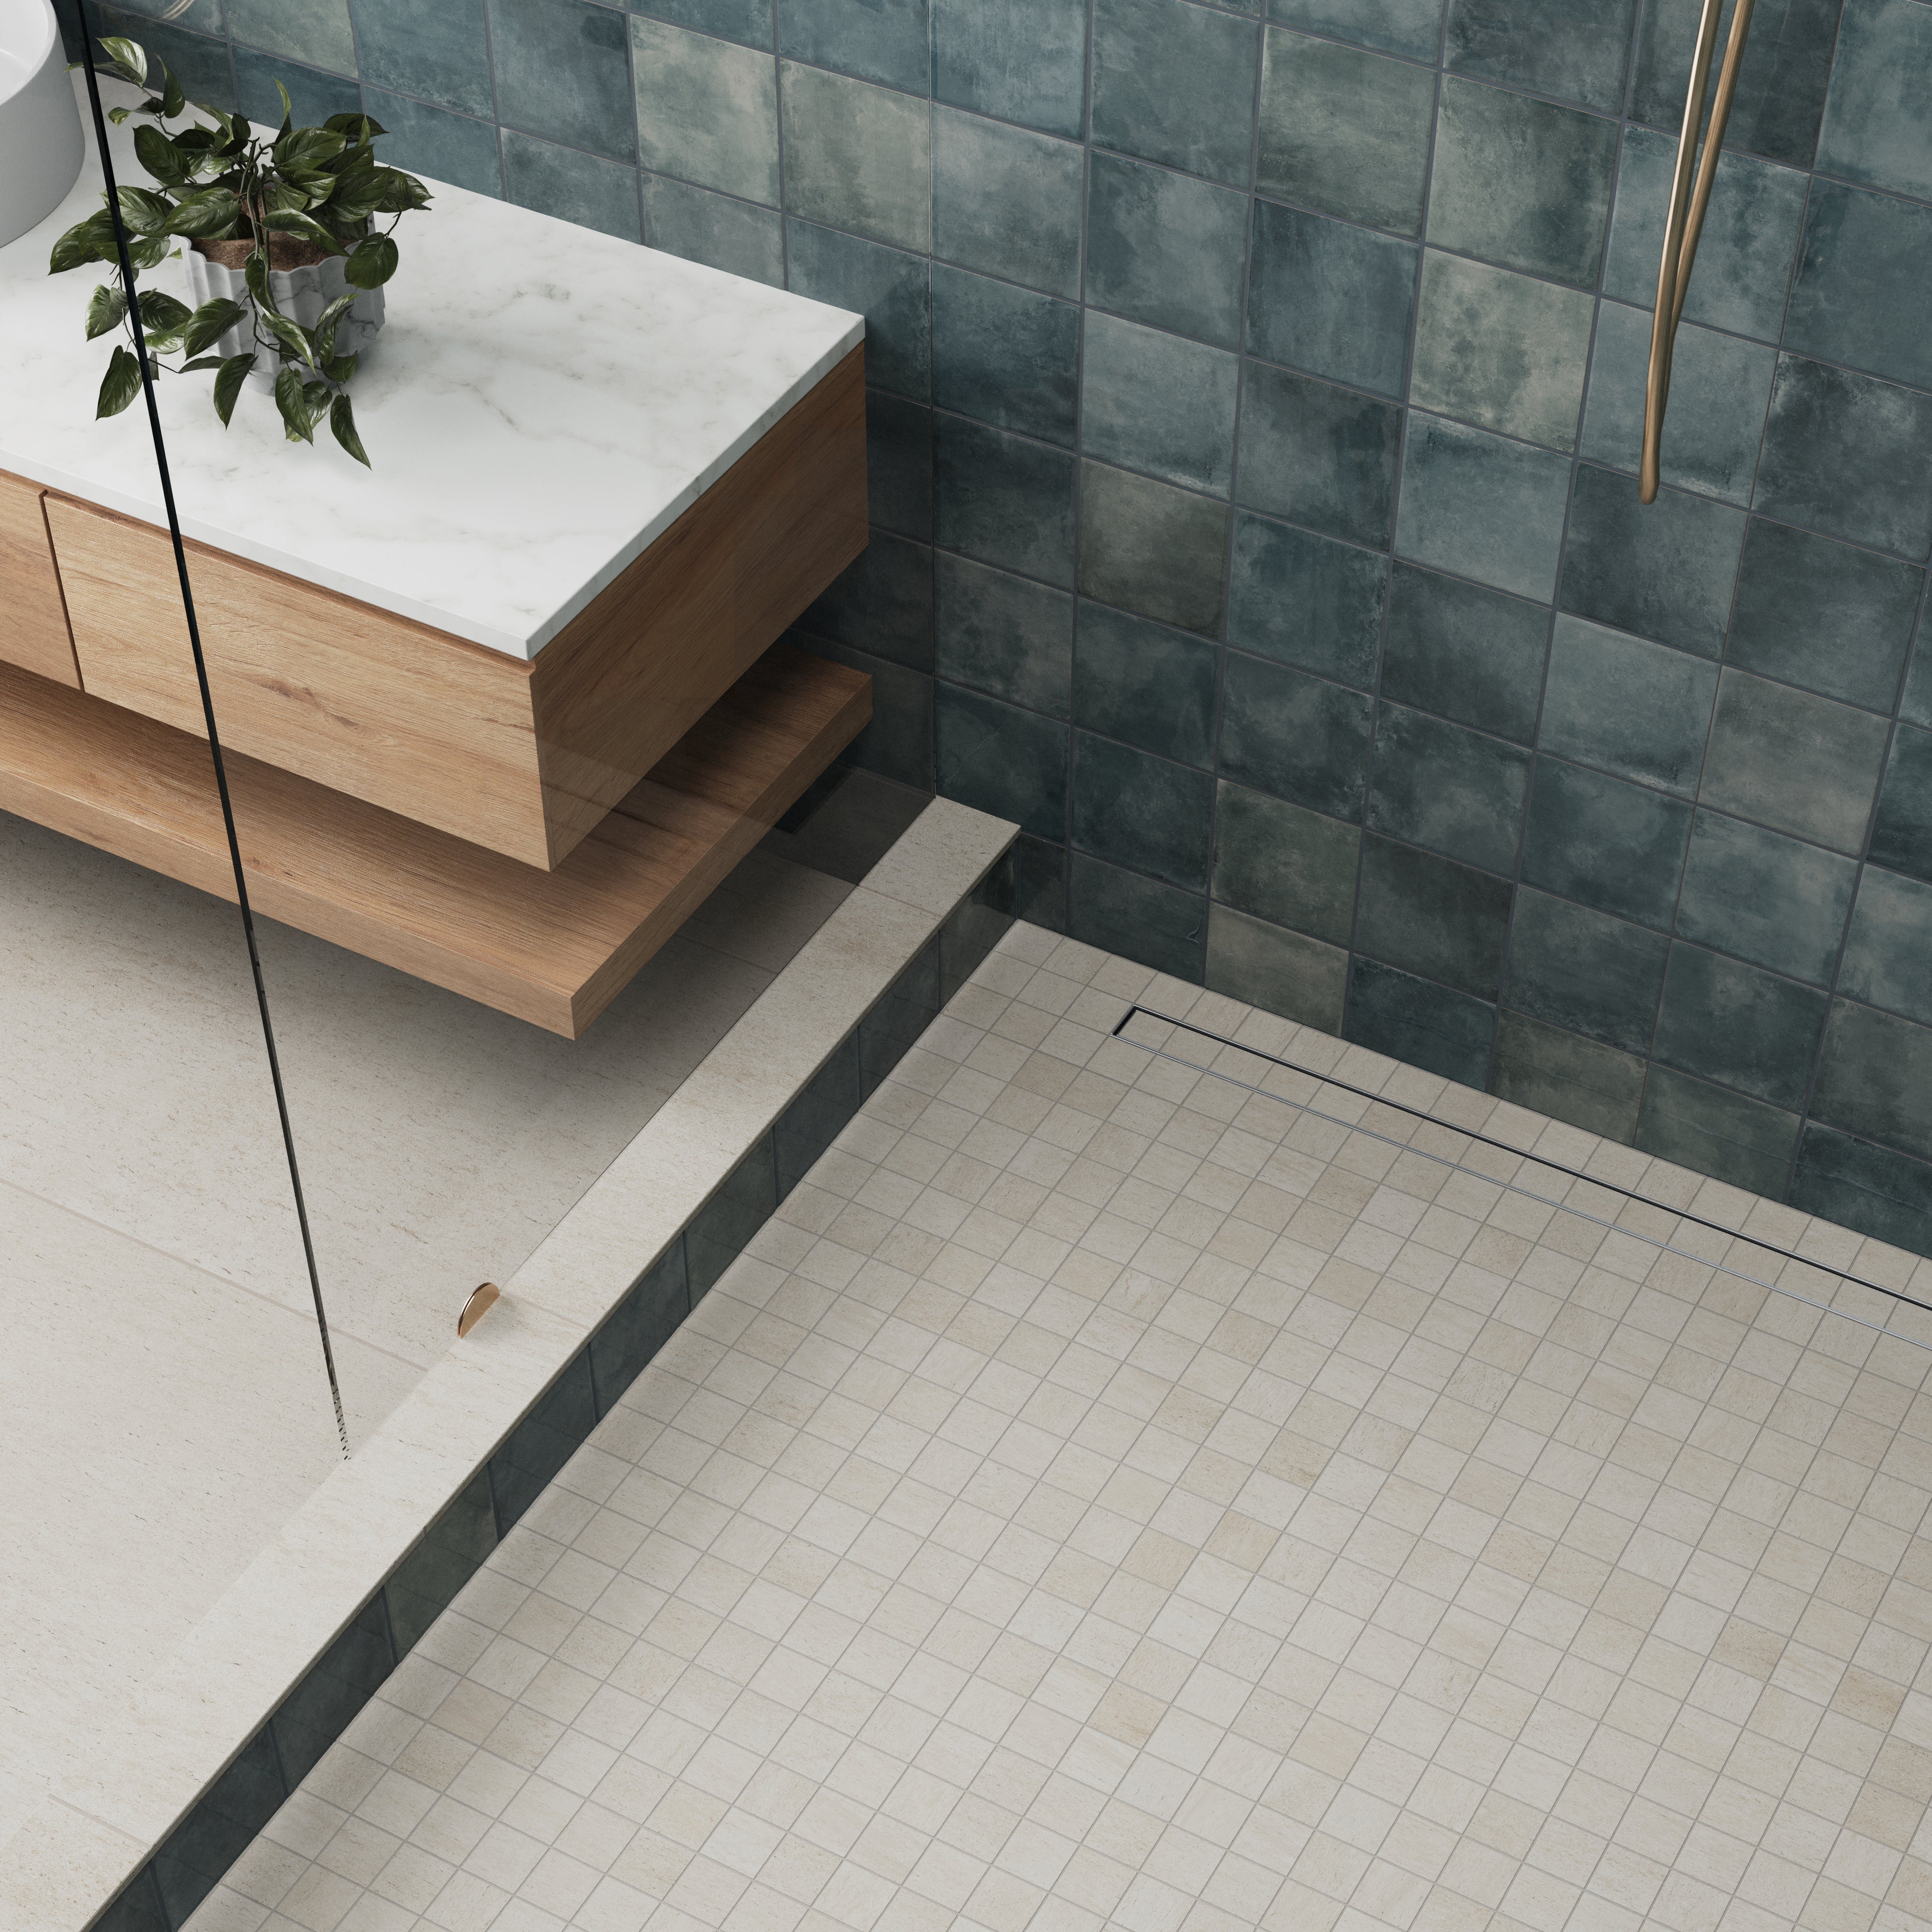 Brody 2x2 Matte Porcelain Mosaic Tile in Sand